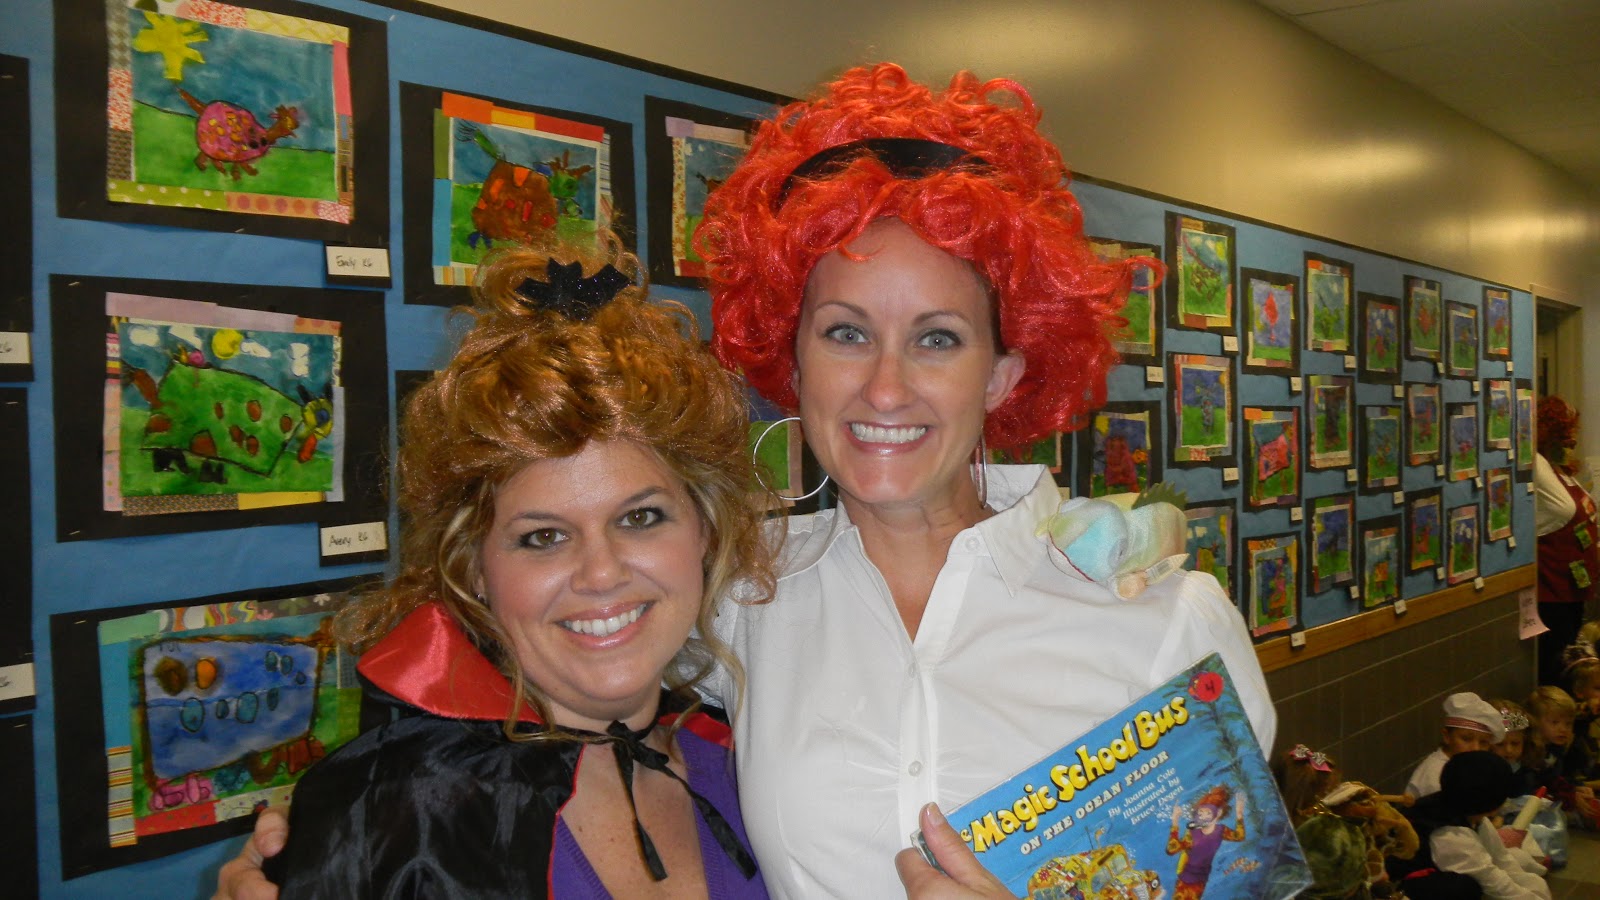 Here I am as Ms. Frizzle - Dives Down Deep Under the Sea with another Frizz...